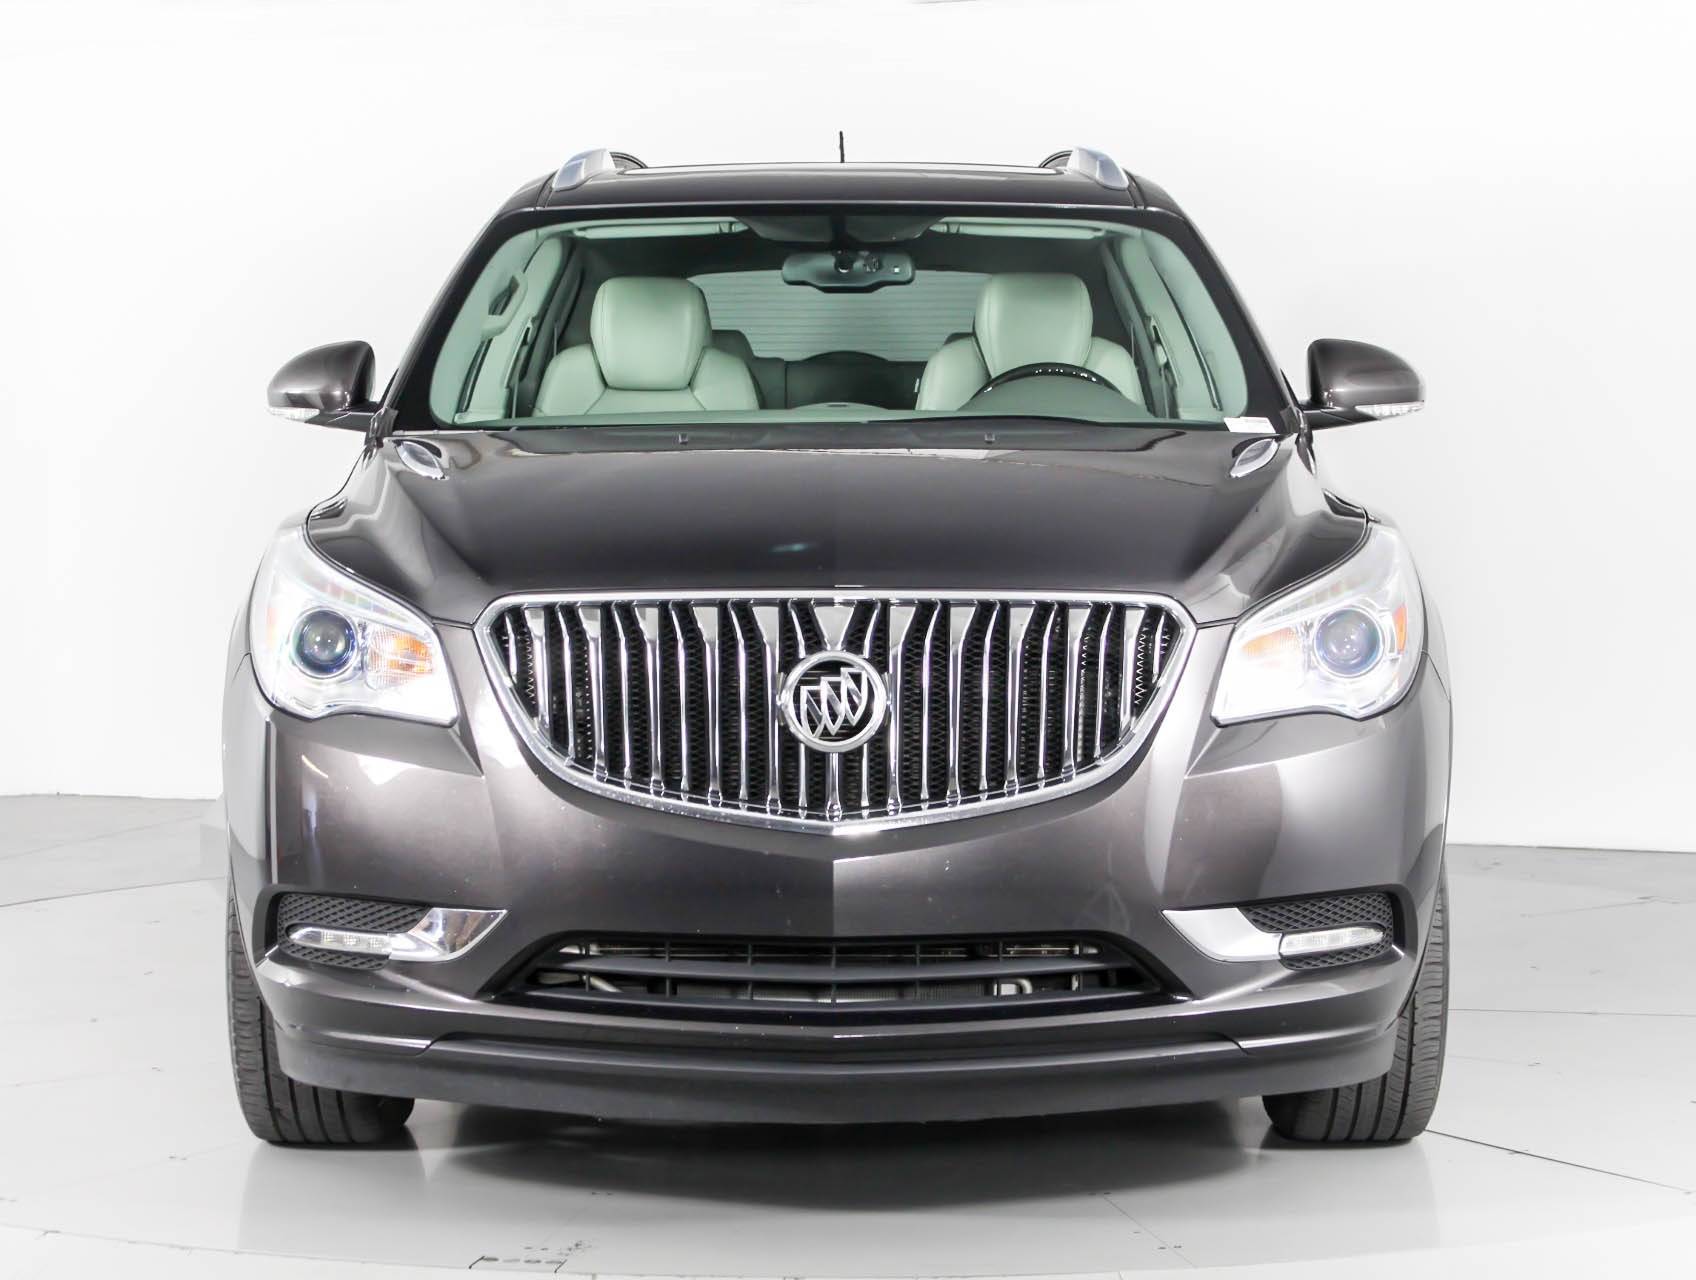 Florida Fine Cars - Used BUICK ENCLAVE 2015 WEST PALM Leather Group